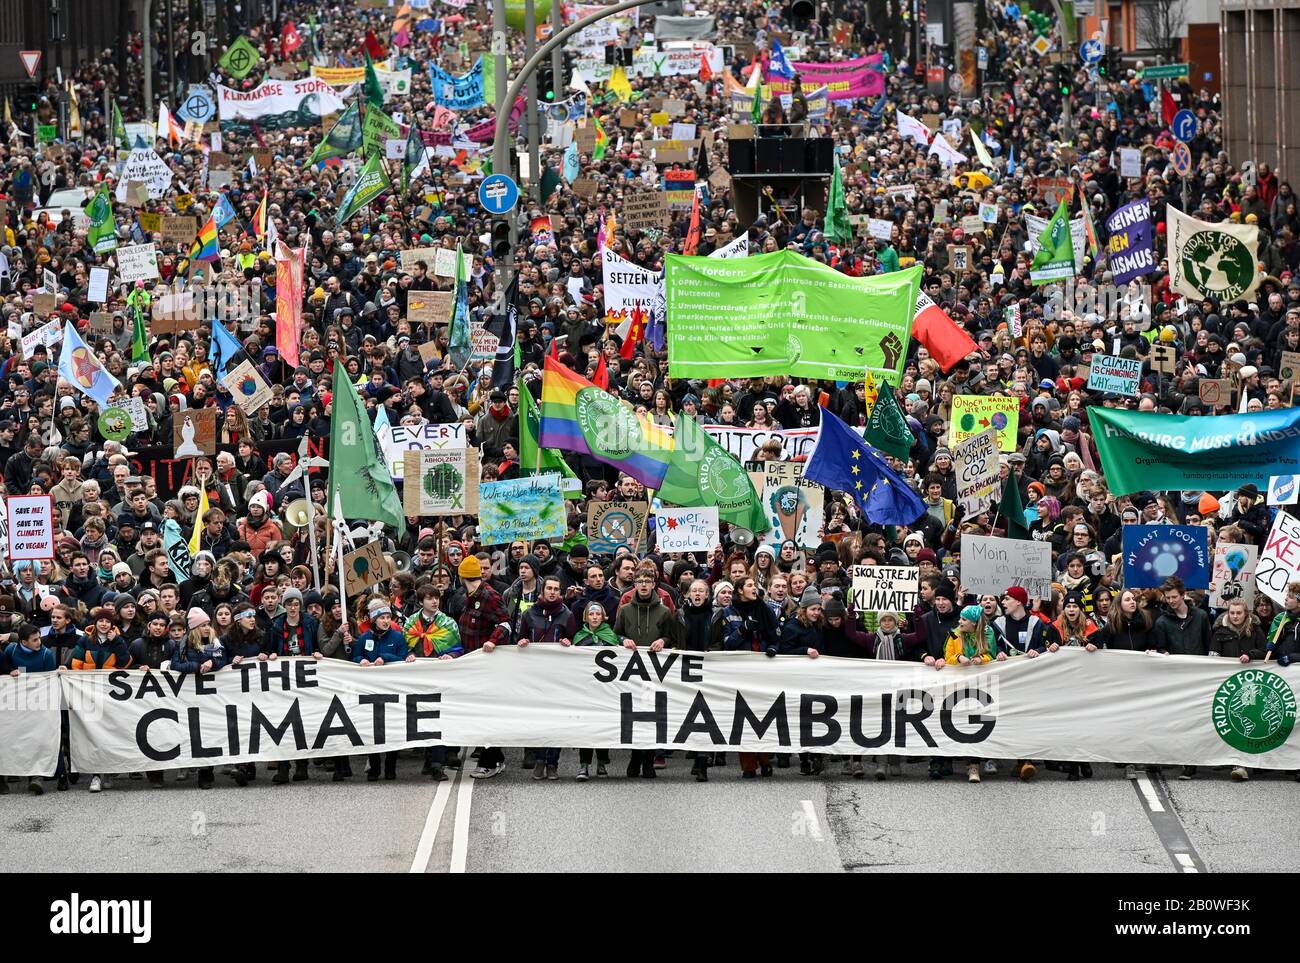 GERMANY, Hamburg city, Fridays for future movement, Save the Climate rally with 30.000 protesters for climate protection, in first row, above the R in Hamburg: swedish activist Greta Thunberg with her banner skolstrejk för klimatet, / DEUTSCHLAND, Hamburg, Fridays-for future Bewegung, Demo fuer Klimaschutz, erste Reihe über dem R im Wort Hamburg: Greta Thunberg mit ihrem Plakat skolstrejk för klimatet, 21.2.2020 Stock Photo